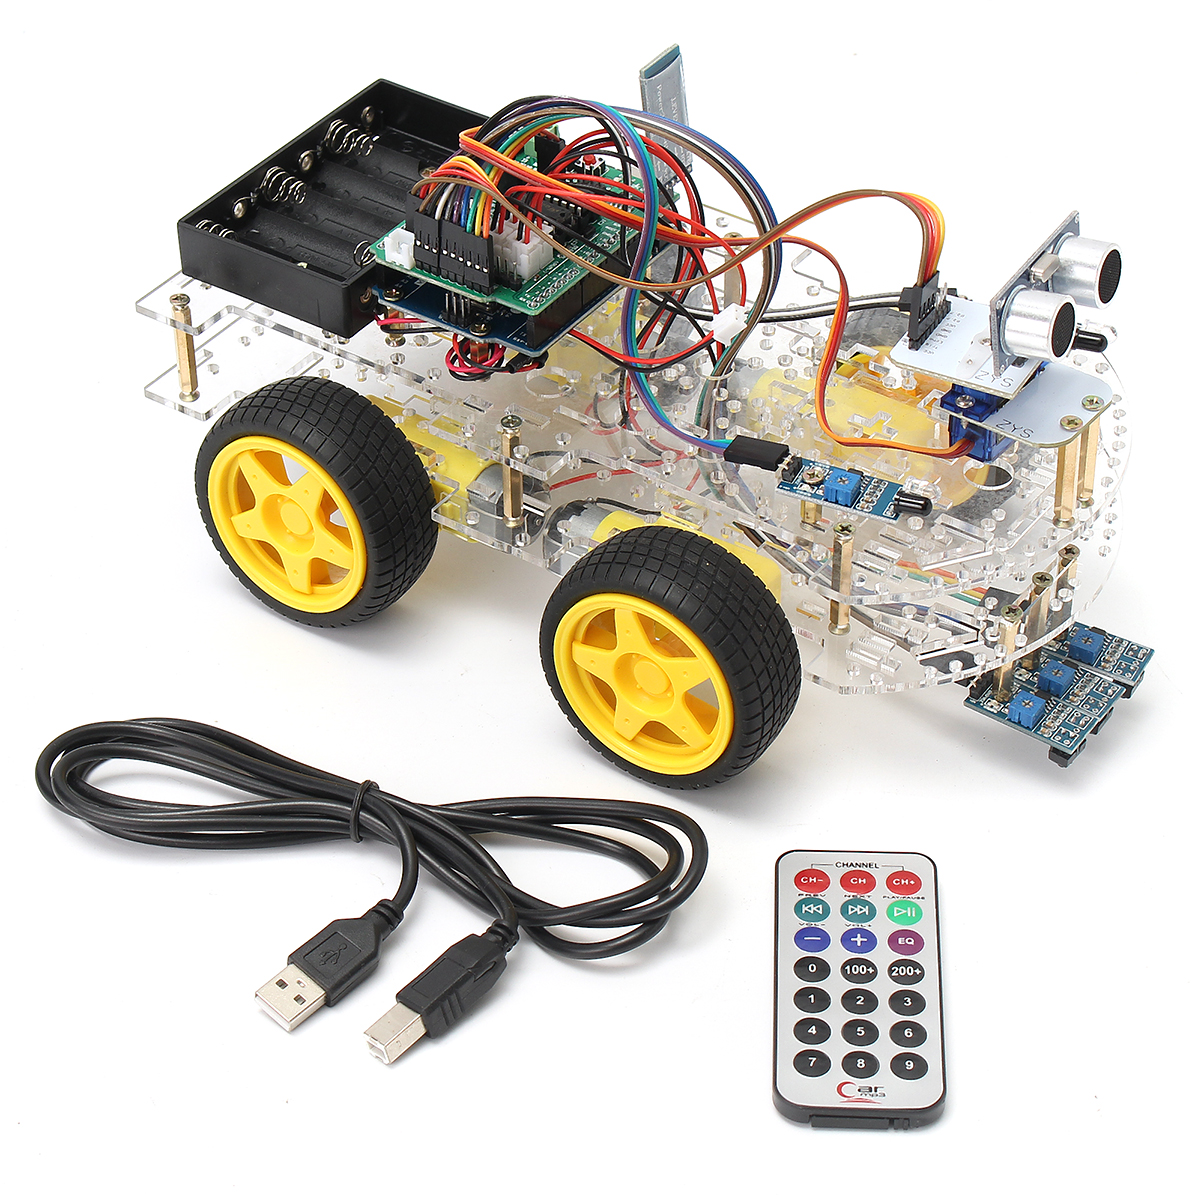 

4WD Programmable Smart Robot Car Starter Kit With Remote Control for Beginner DIY